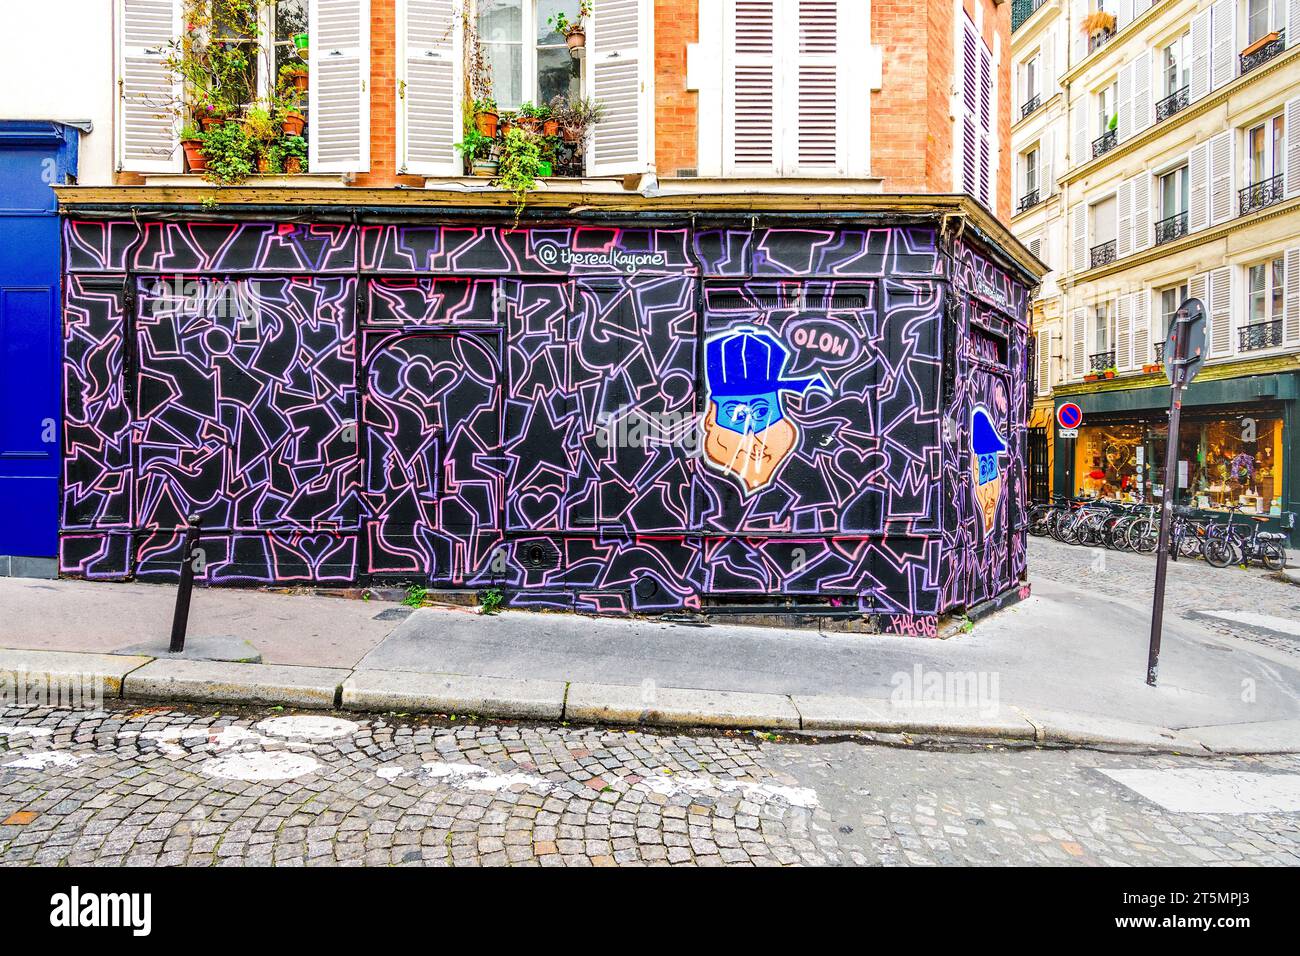 Street art mural by Kay One (therealkayone) on empty shop in Butte-Montmartre, Paris 18, France. Stock Photo